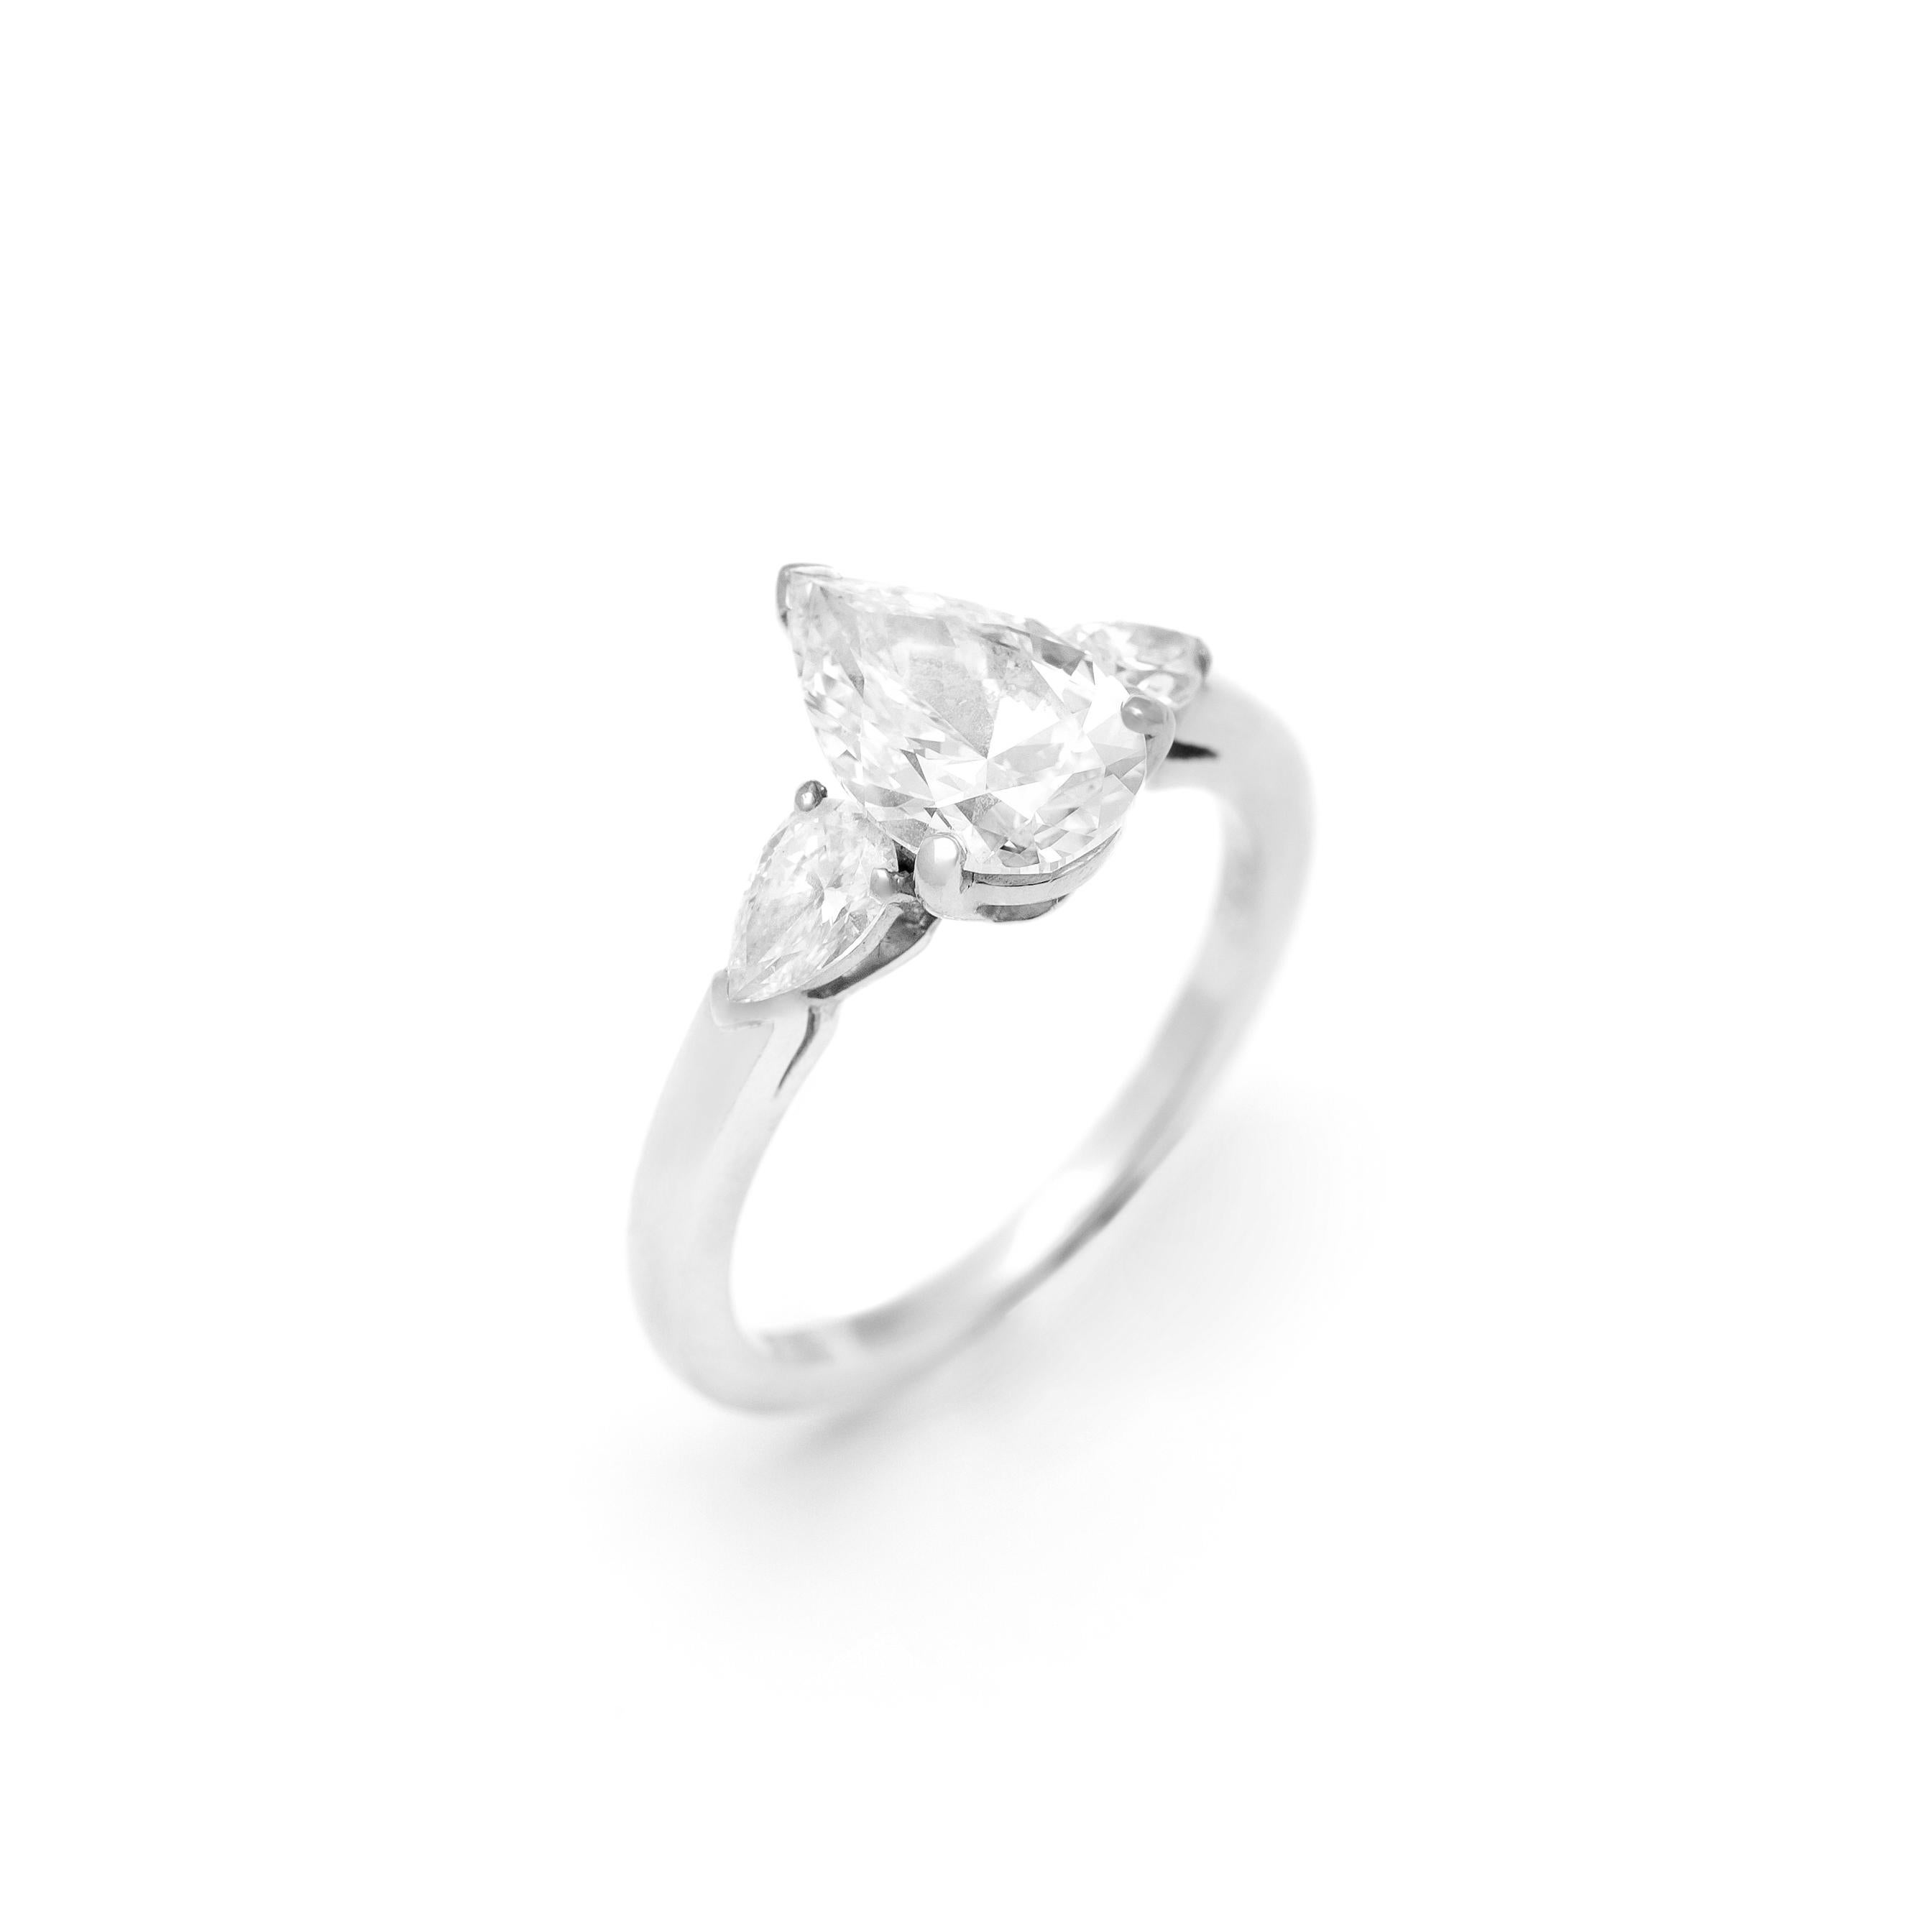 Contemporary Van Cleef and Arpels 1.51 carat Pear Shape D Vvs1 Solitaire White Gold Ring